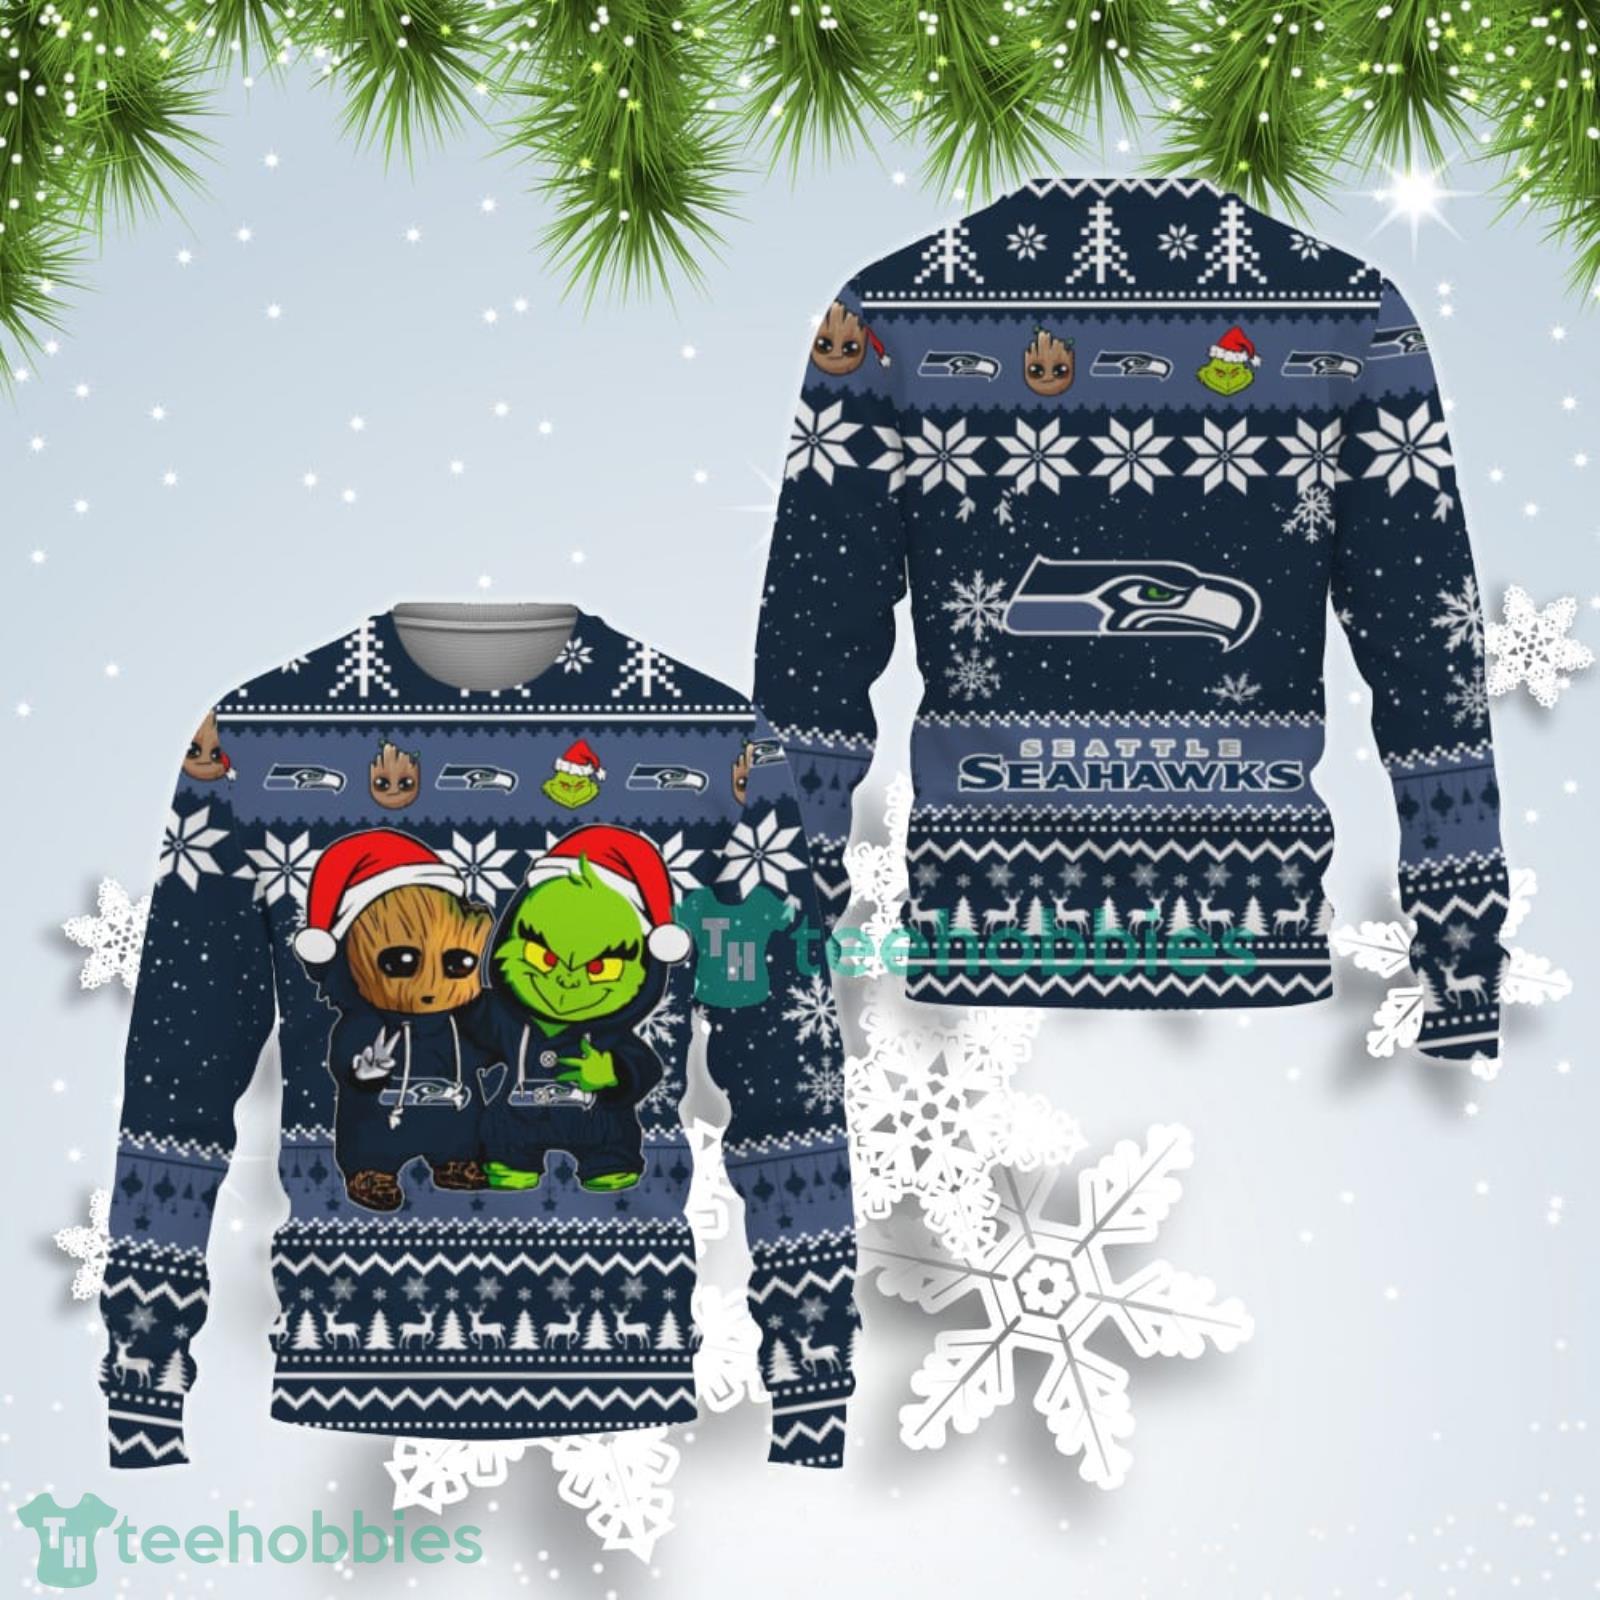 Seattle Seahawks Baby Groot And Grinch Best Friends Ugly Christmas Sweater Product Photo 1